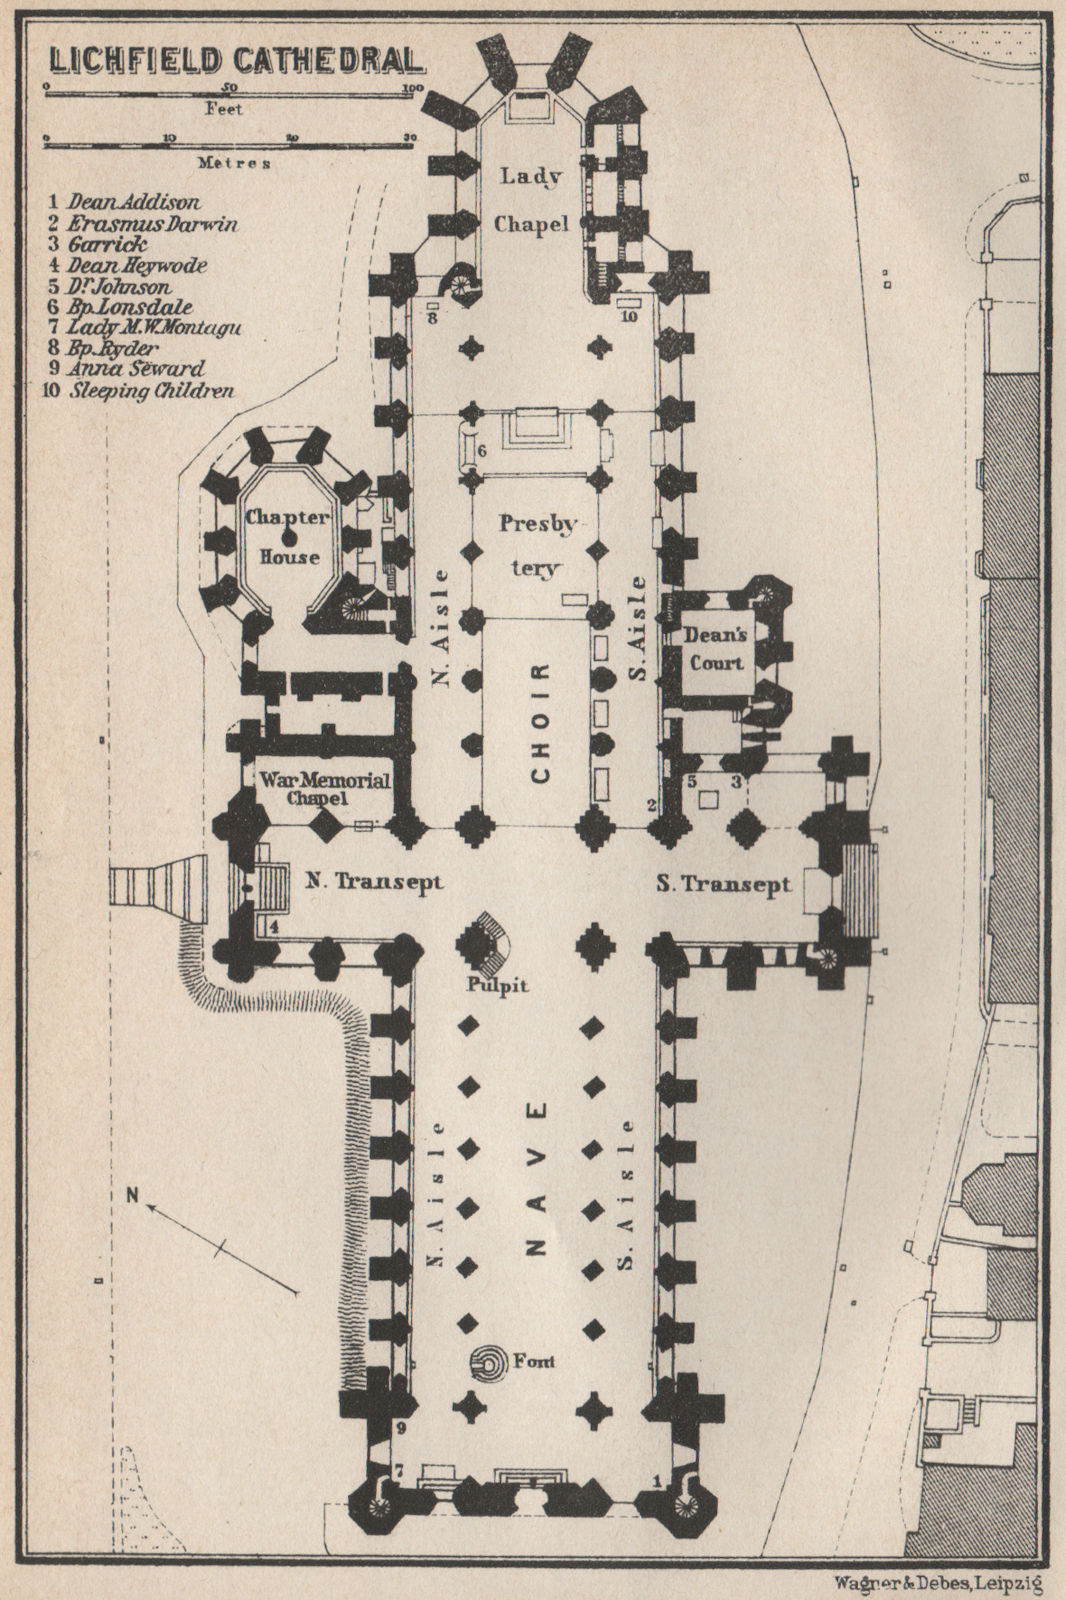 Associate Product LICHFIELD CATHEDRAL floor plan. Staffordshire. BAEDEKER 1927 old vintage map